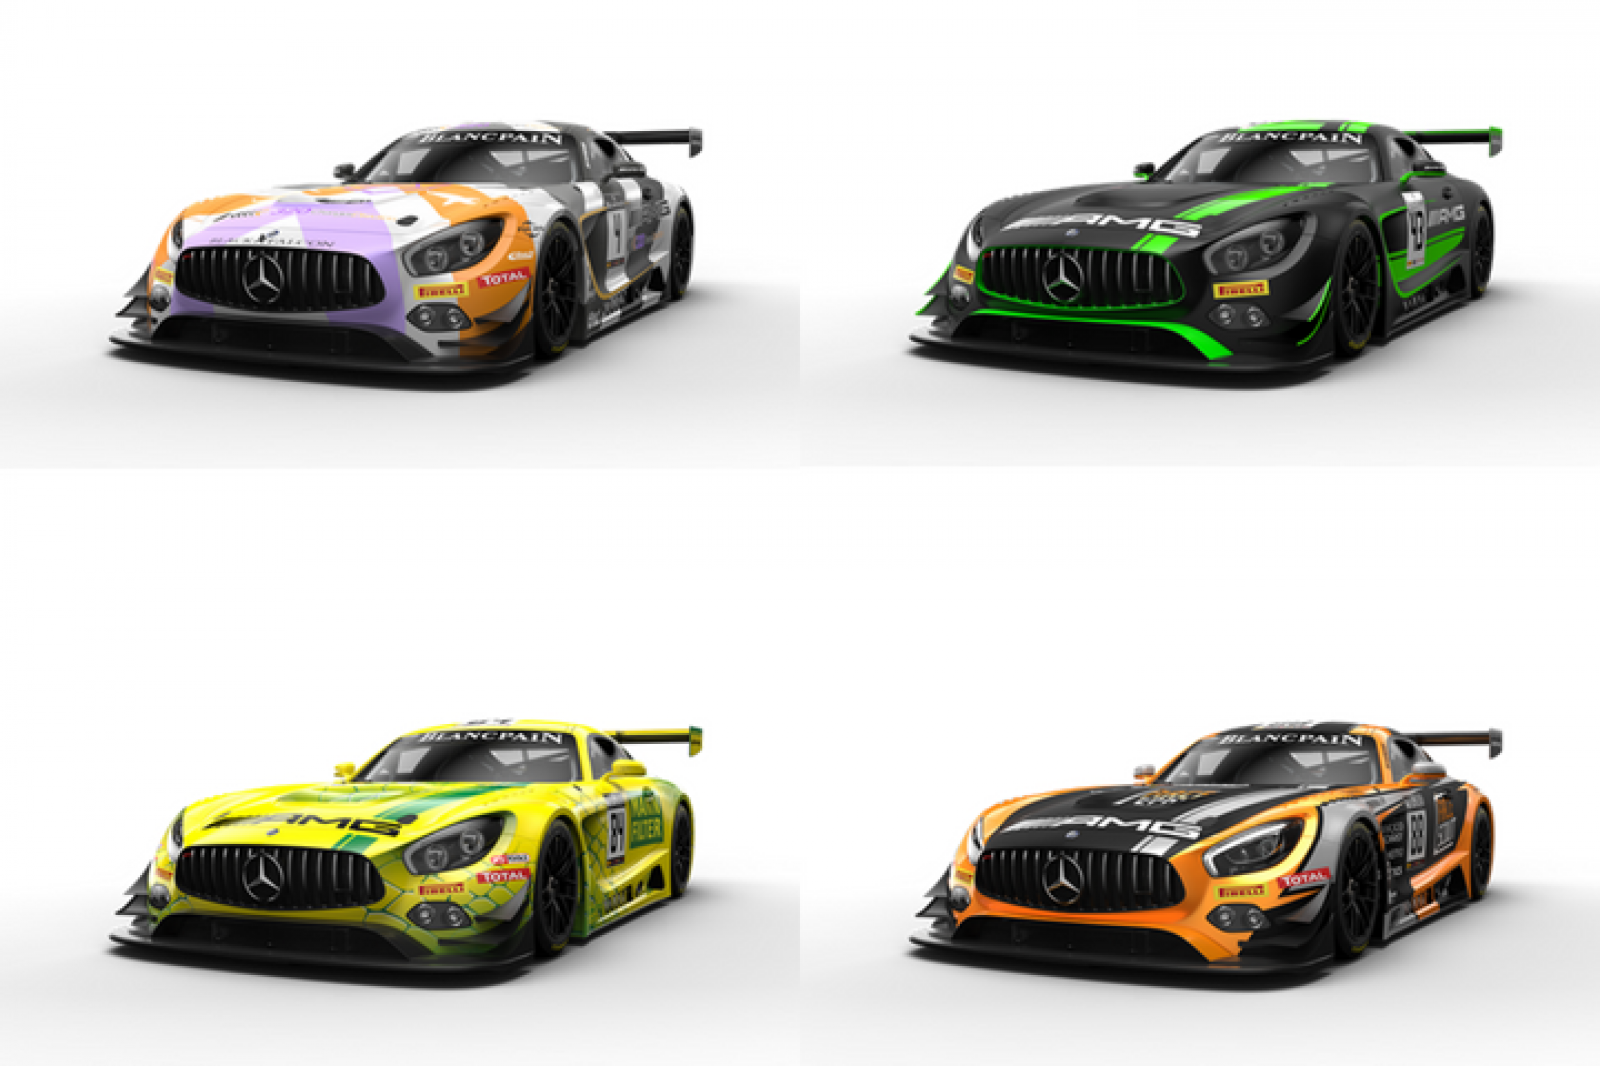 Mercedes-AMG with a record line-up for the Total 24 Hours of Spa